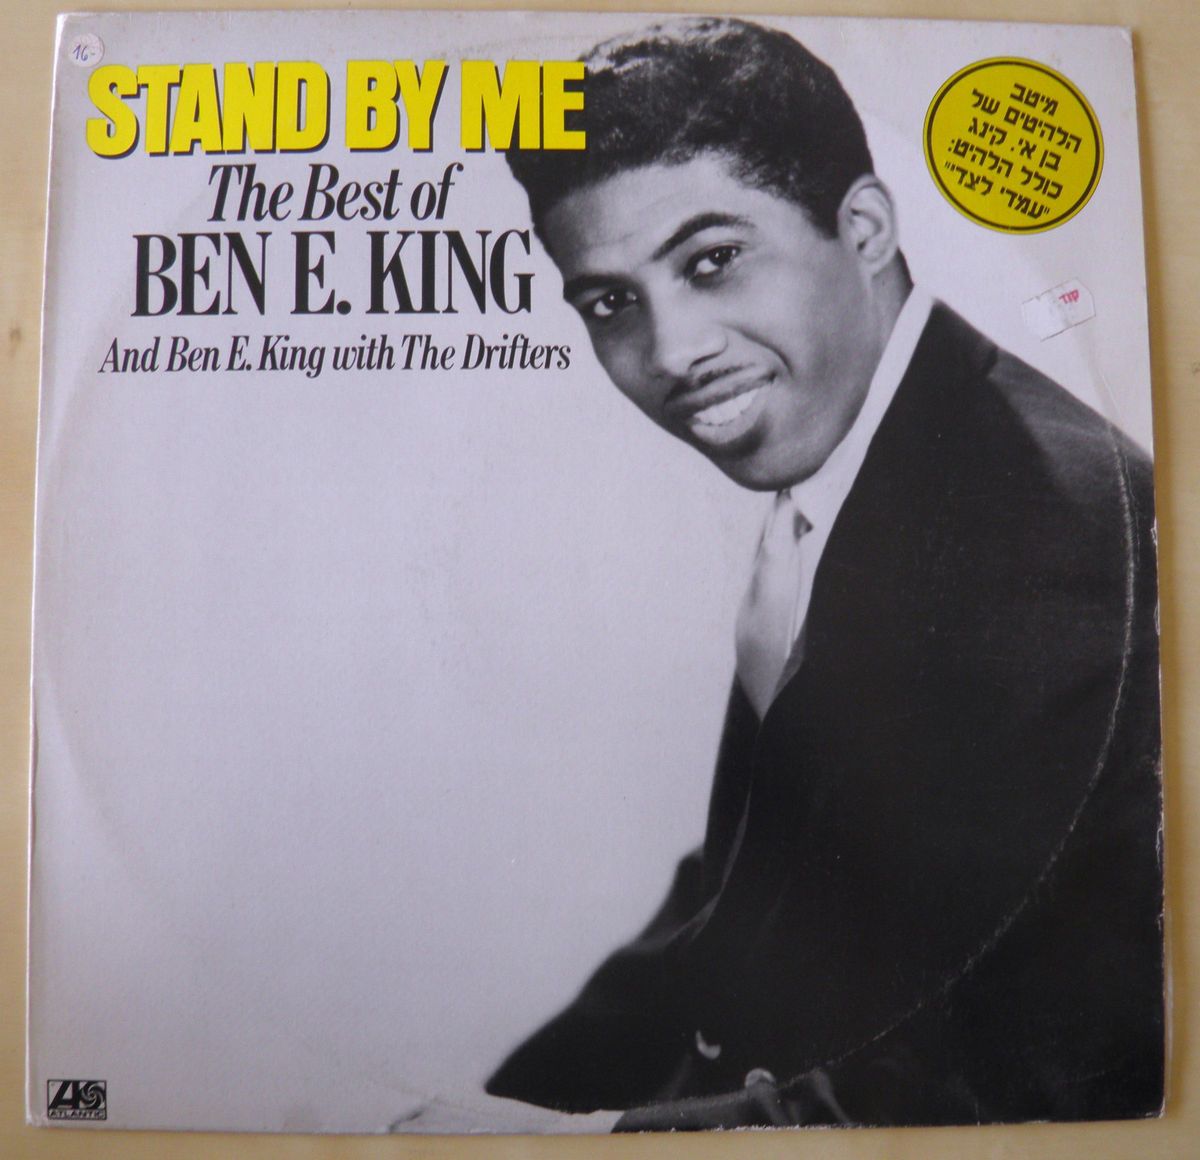 BEN E KING THE BEST OF LP VINYL STAND BY ME ISRAEL ISRAELI PRESS BAN 